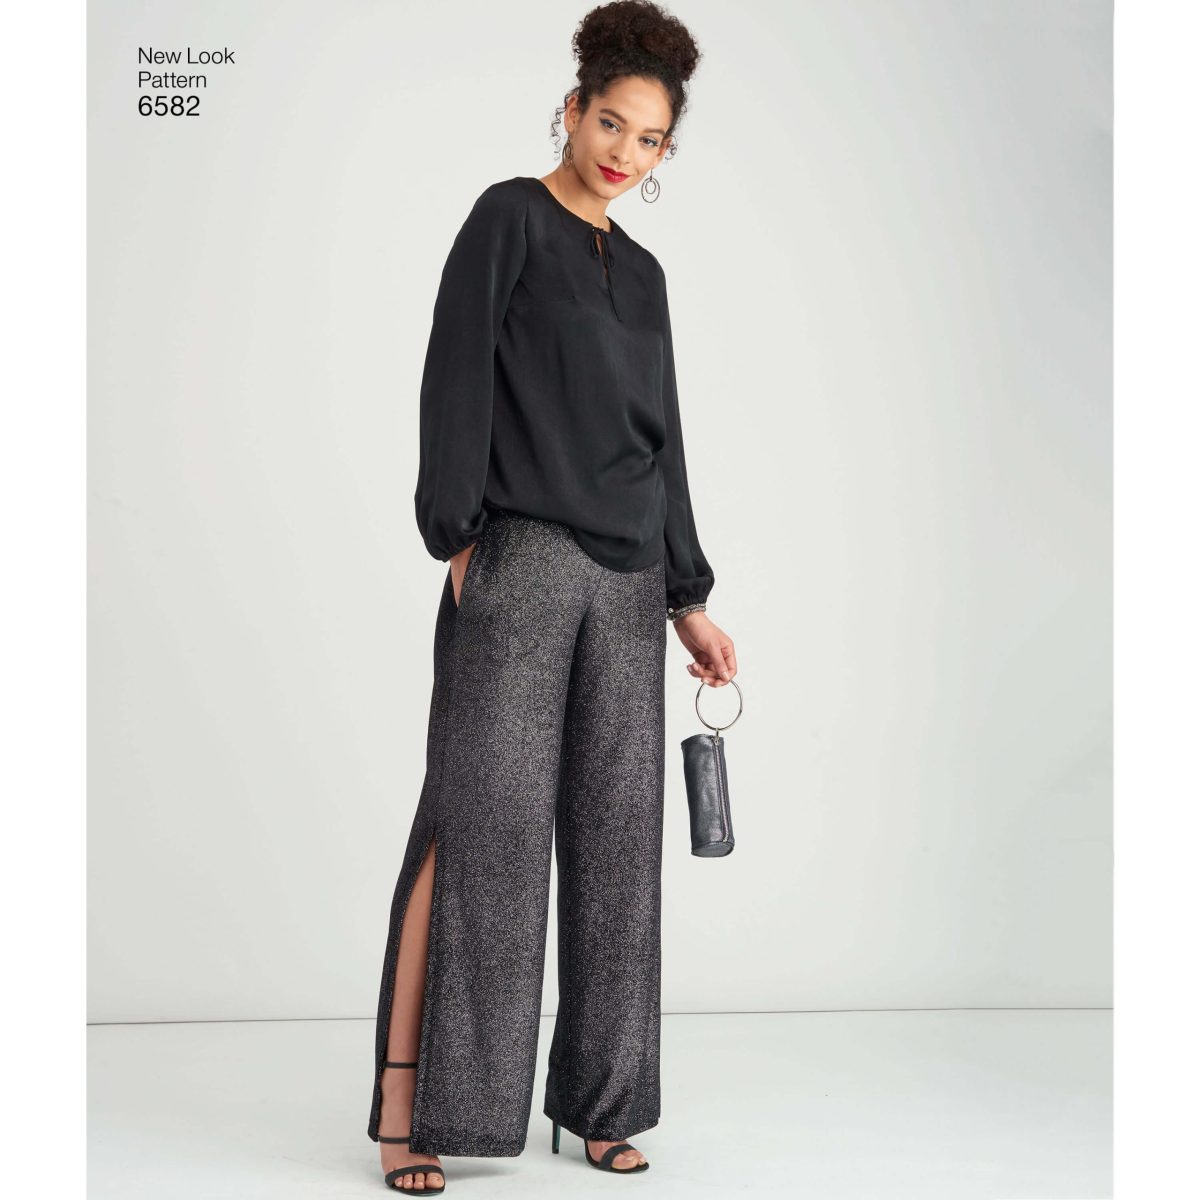 New Look Pattern 6582 Misses' Pant, Top and Clutch Bag